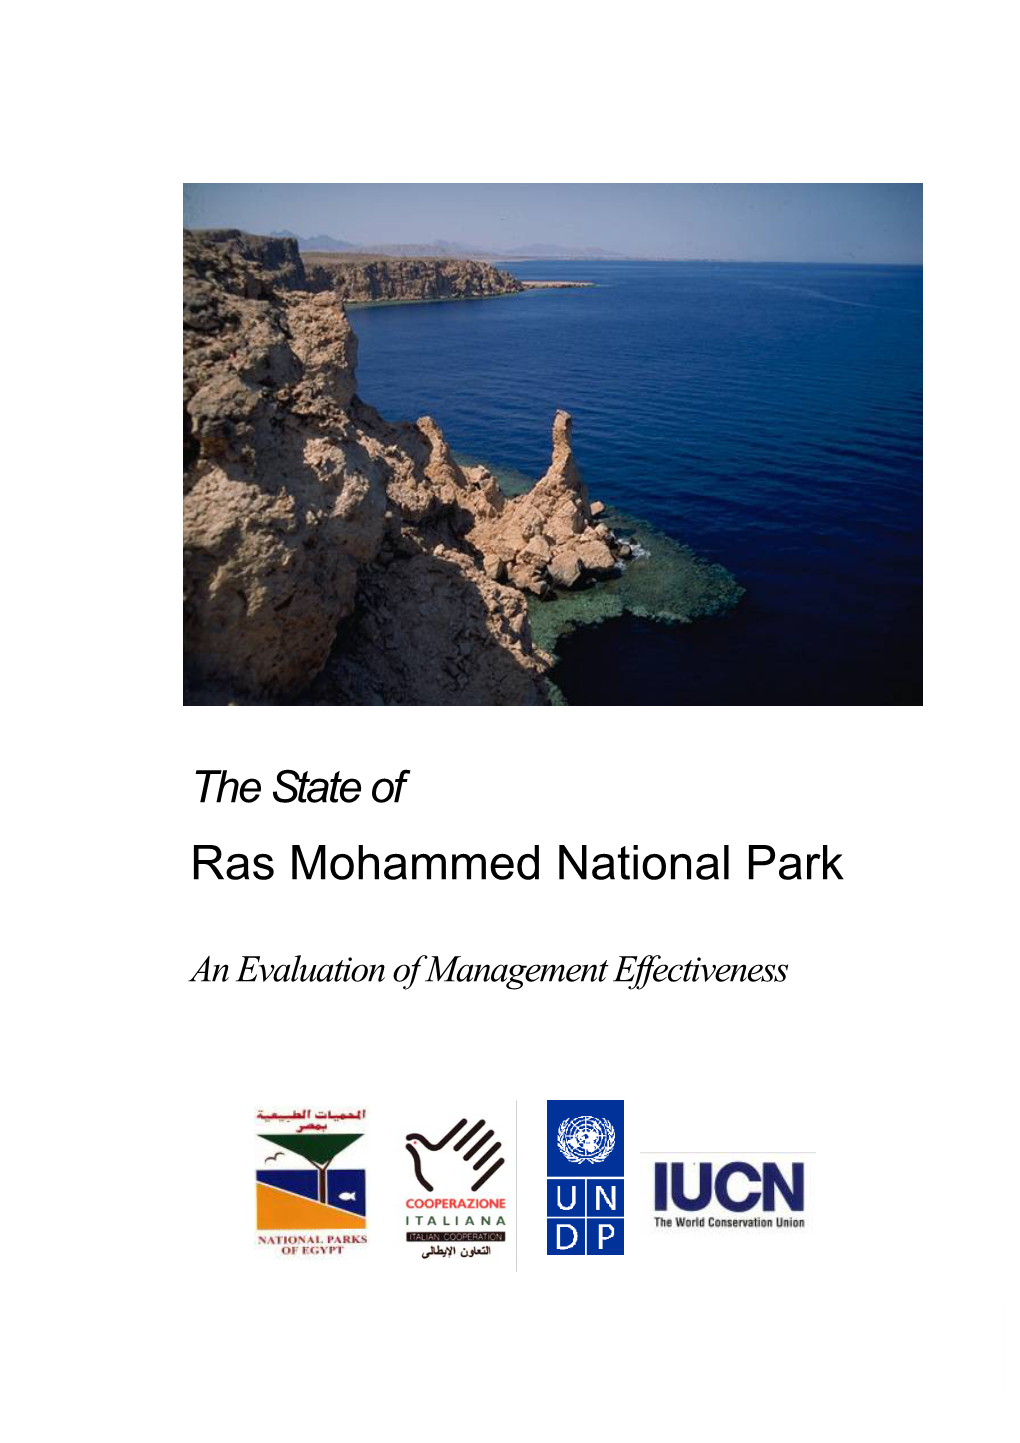 The State of Ras Mohammed National Park